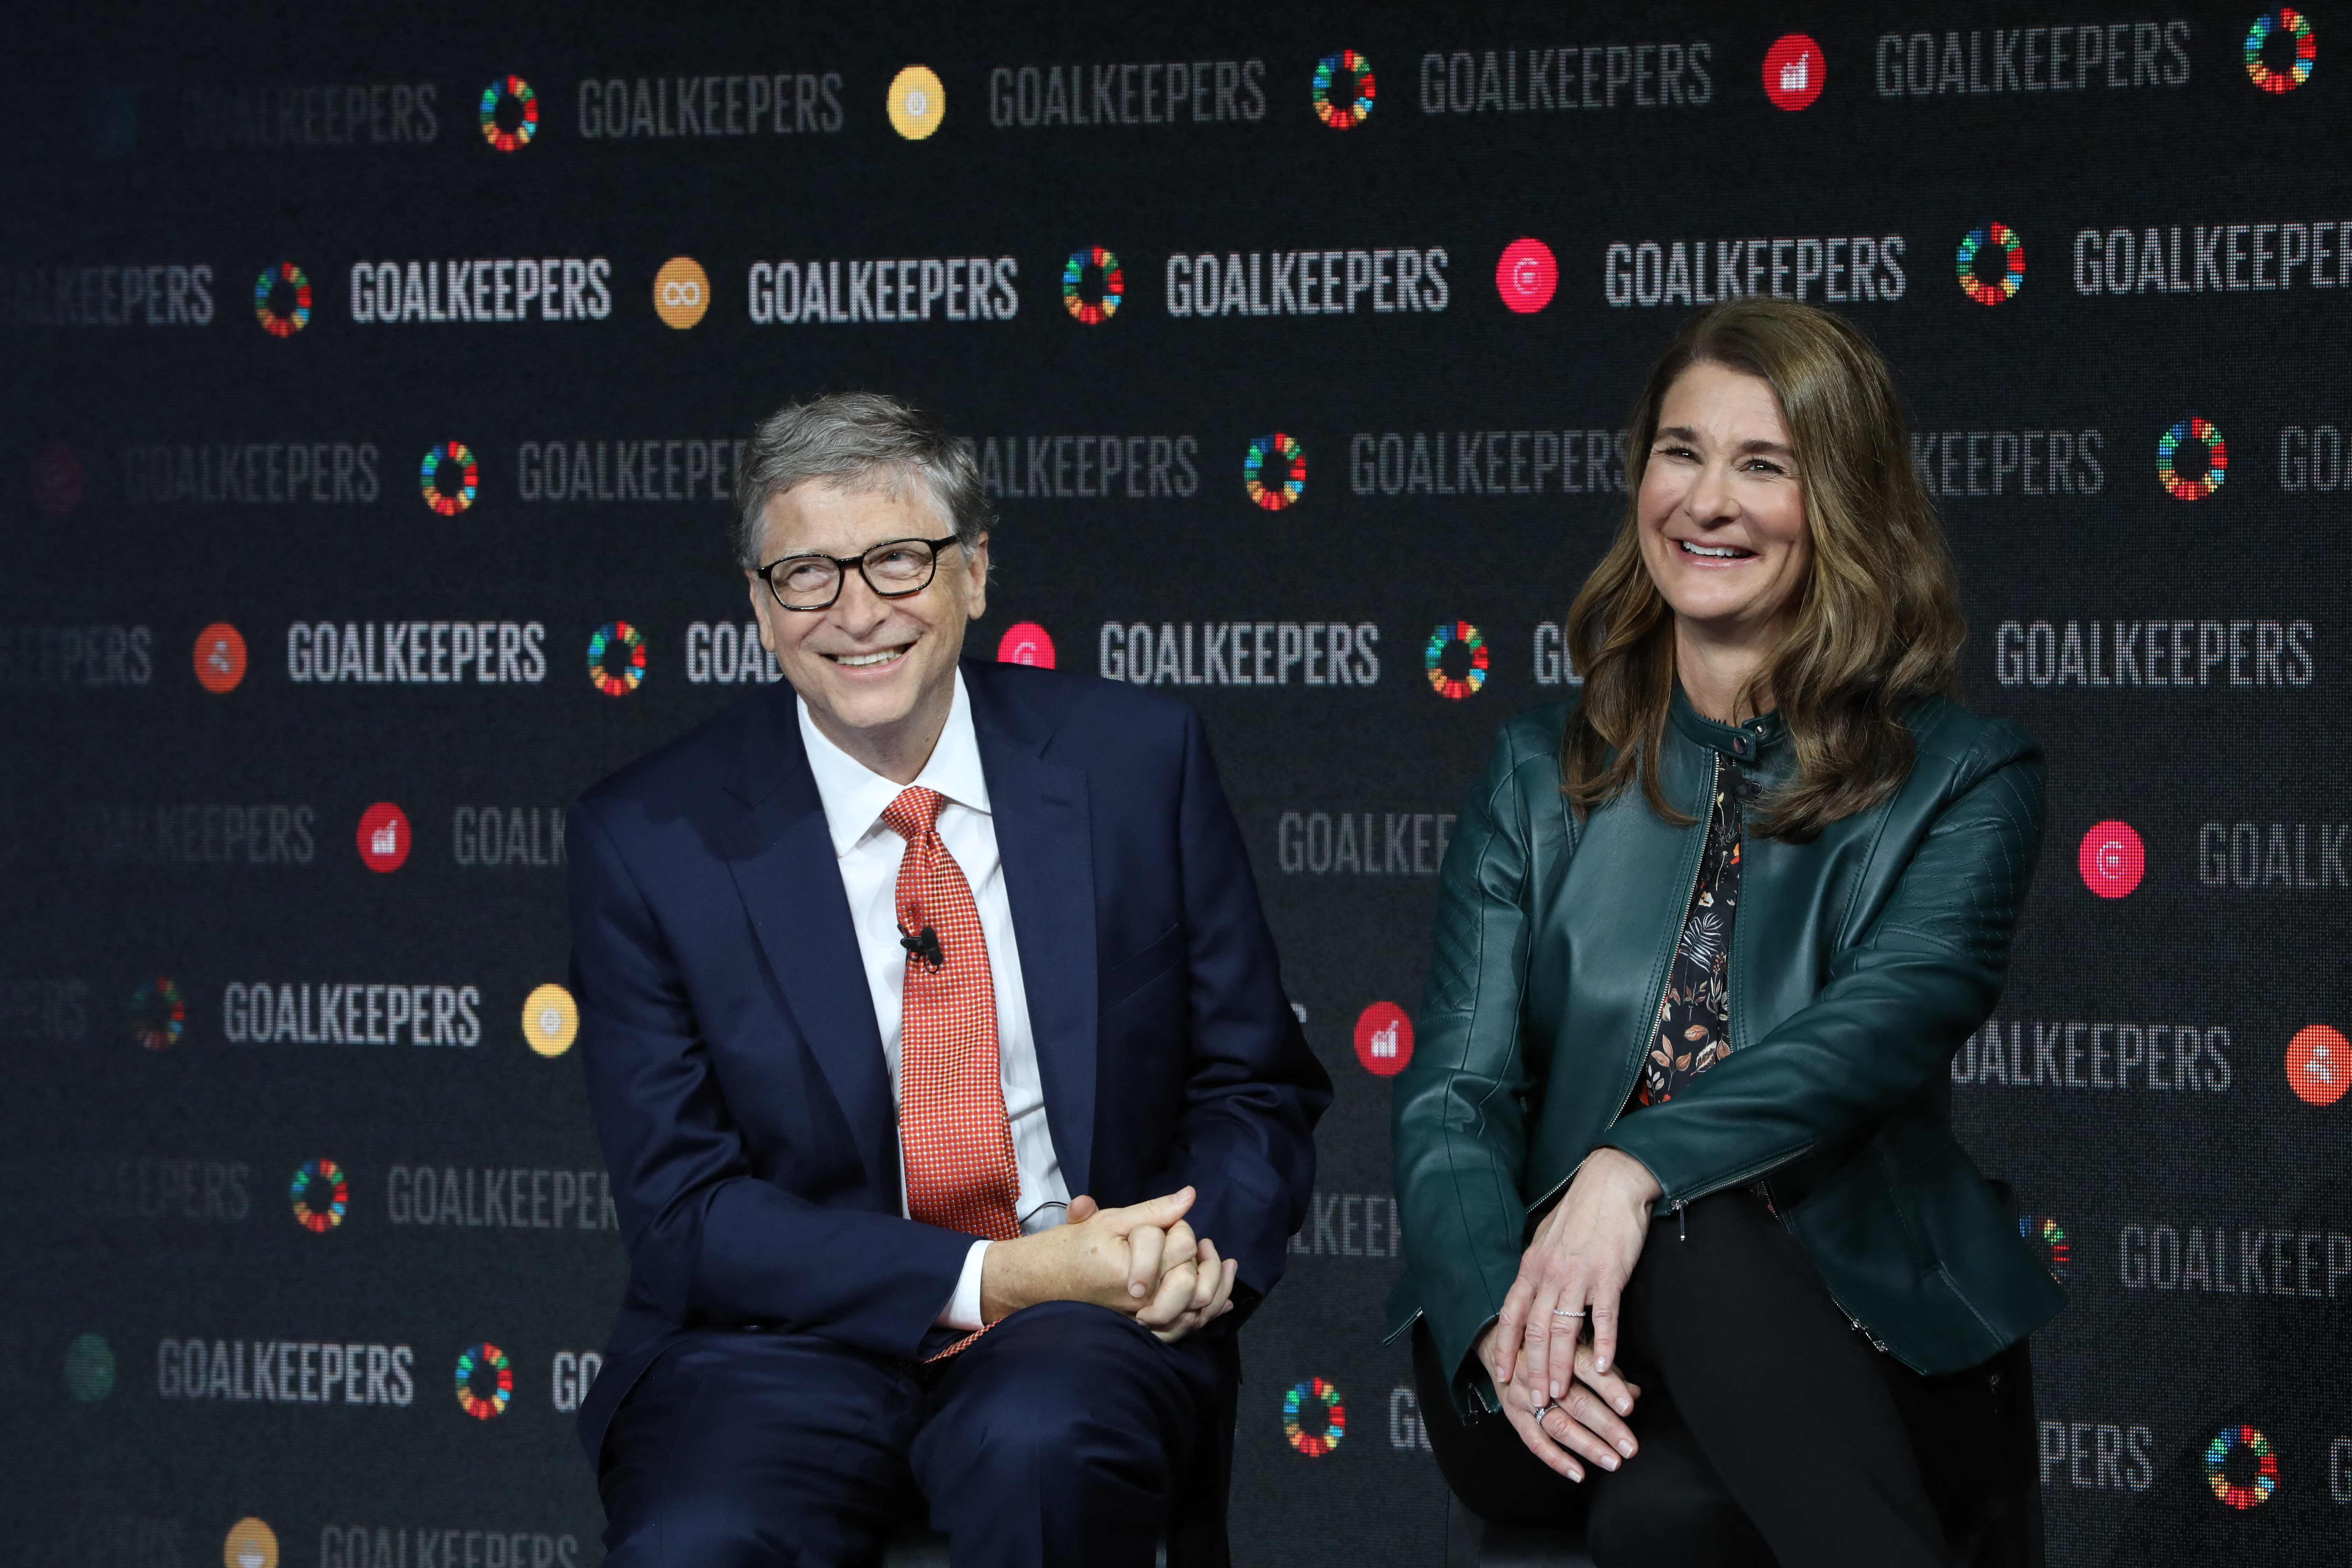 File Bill Gates and his wife Melinda Gates introduce the Goalkeepers event at the Lincoln Center in New York